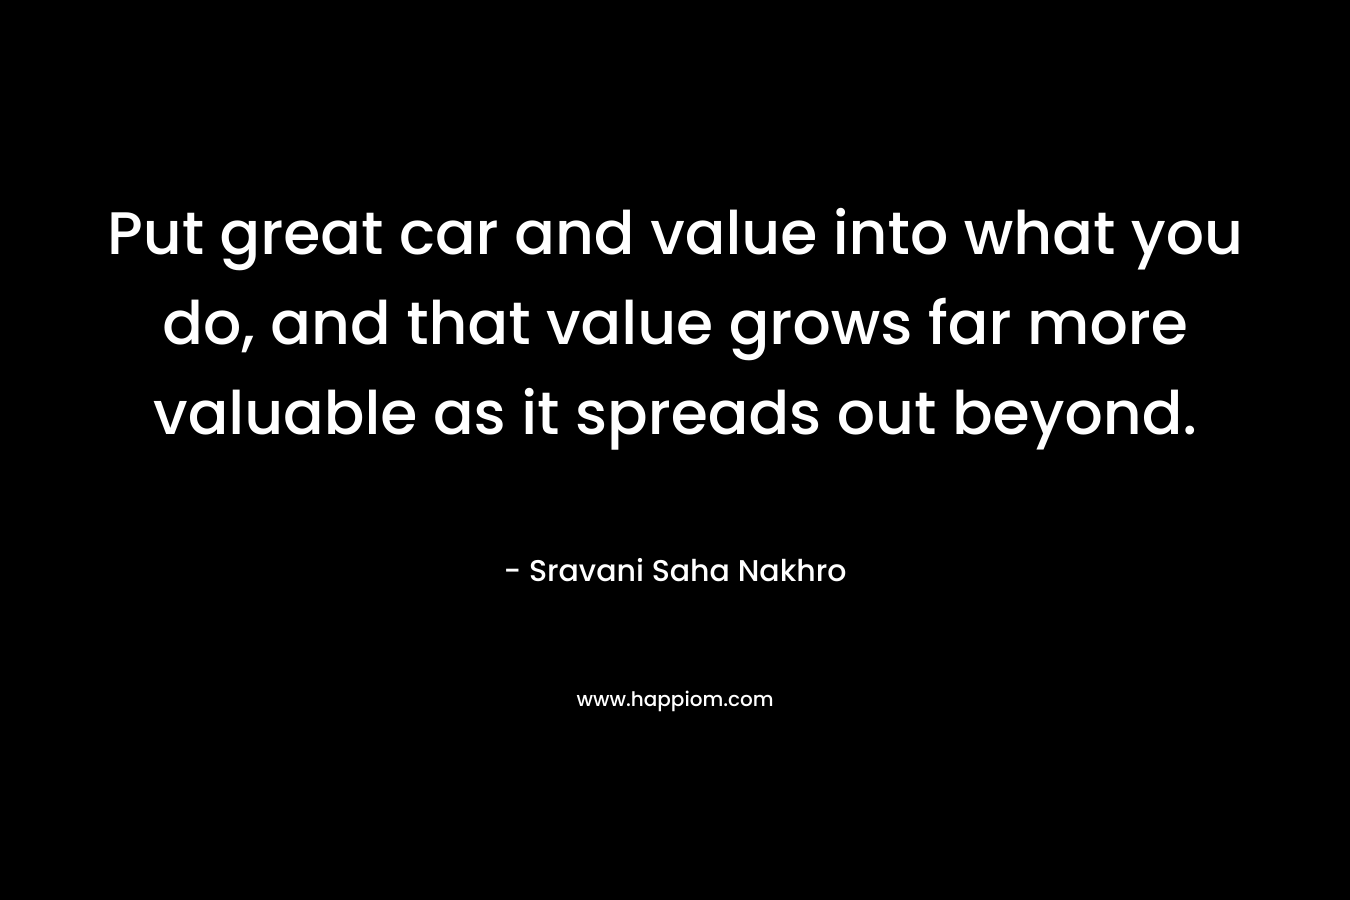 Put great car and value into what you do, and that value grows far more valuable as it spreads out beyond. – Sravani Saha Nakhro